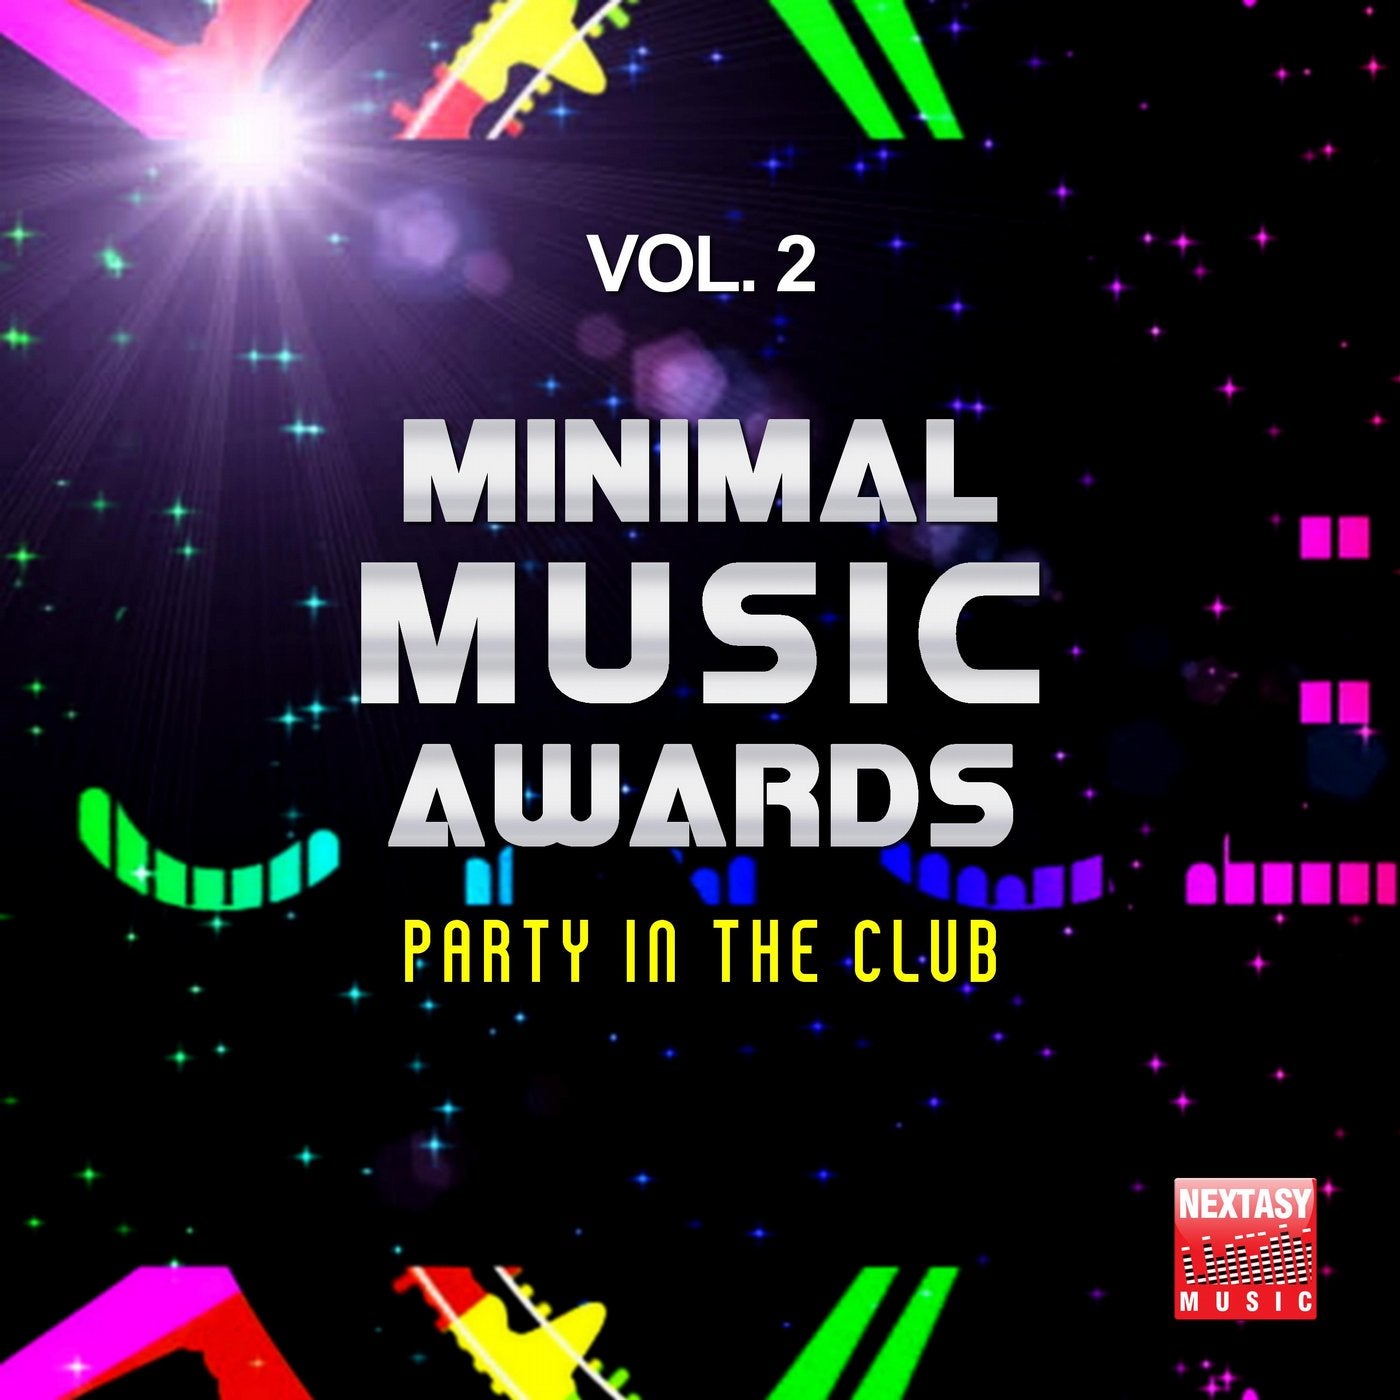 Minimal Music Awards, Vol. 2 (Party In The Club)